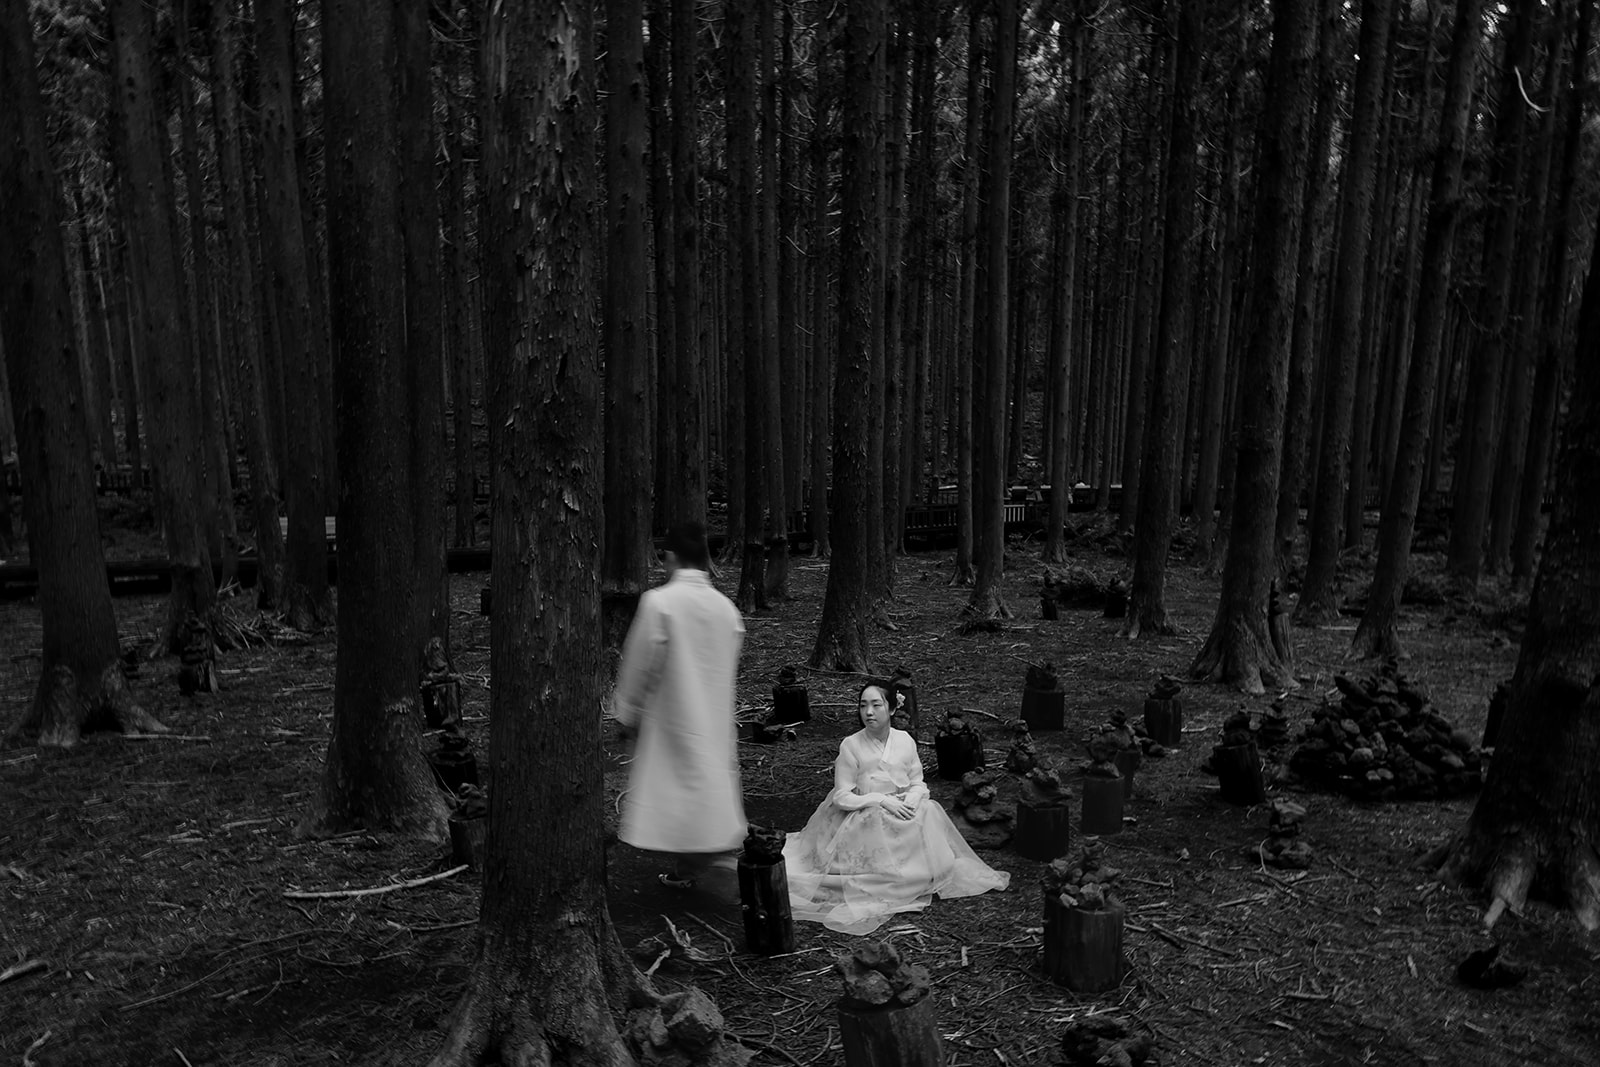 Pre-wedding, black and white photo of a couple in a wooded area.